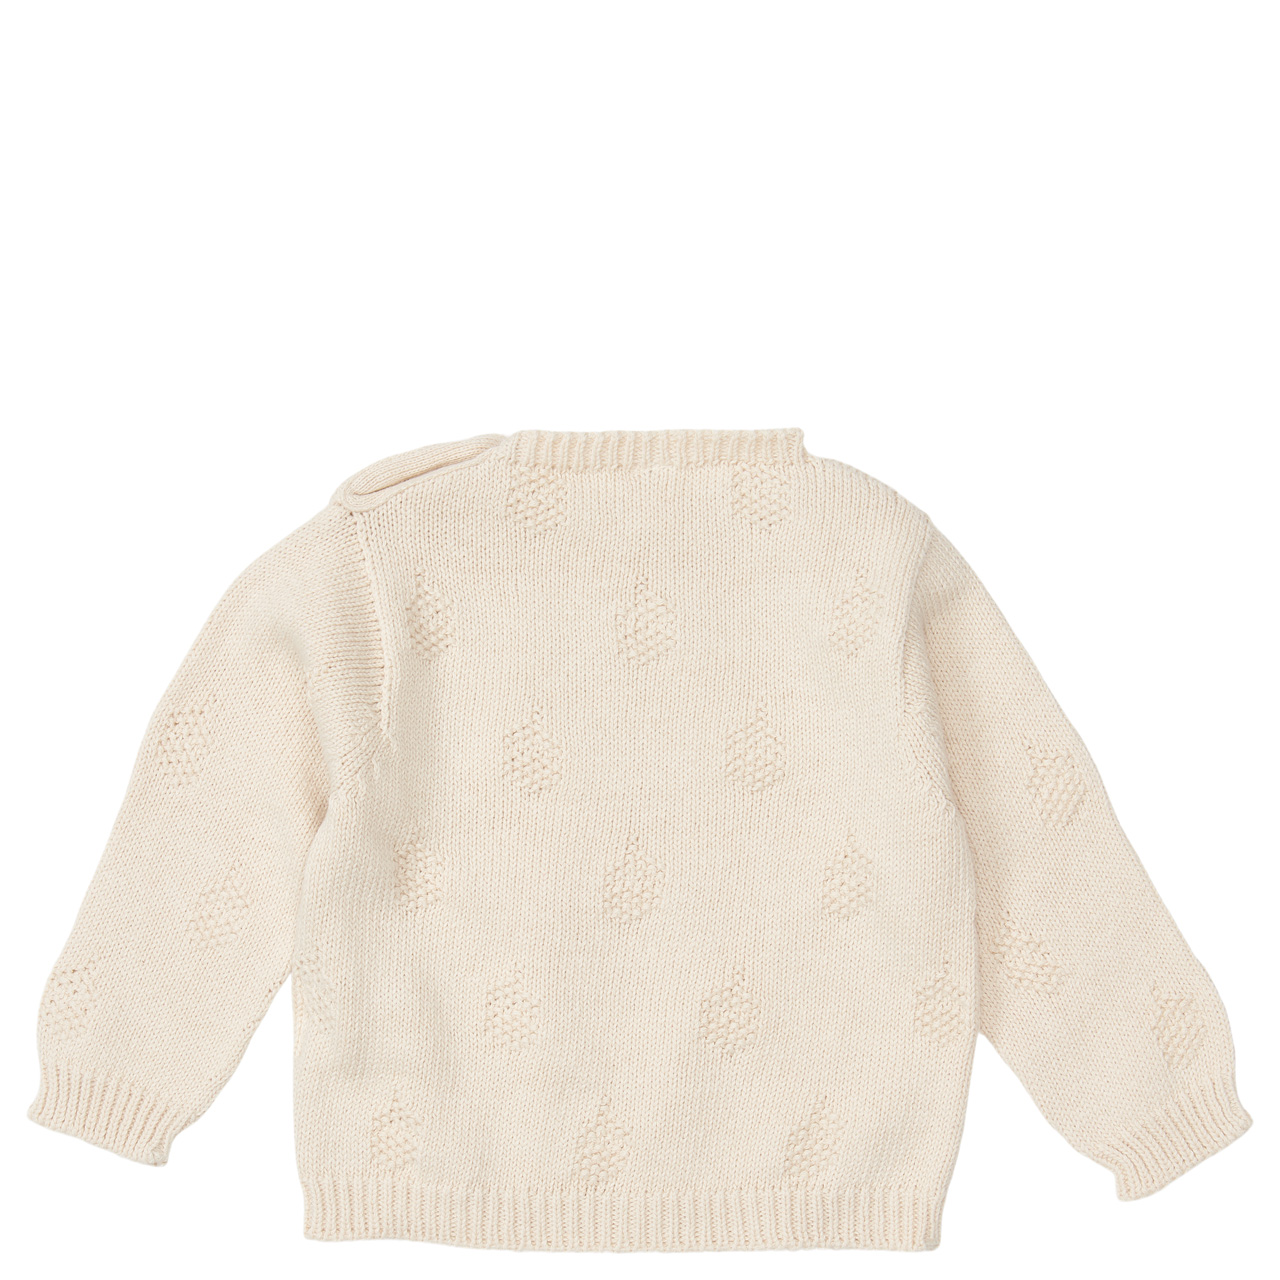 Babypullover Nuts warm white